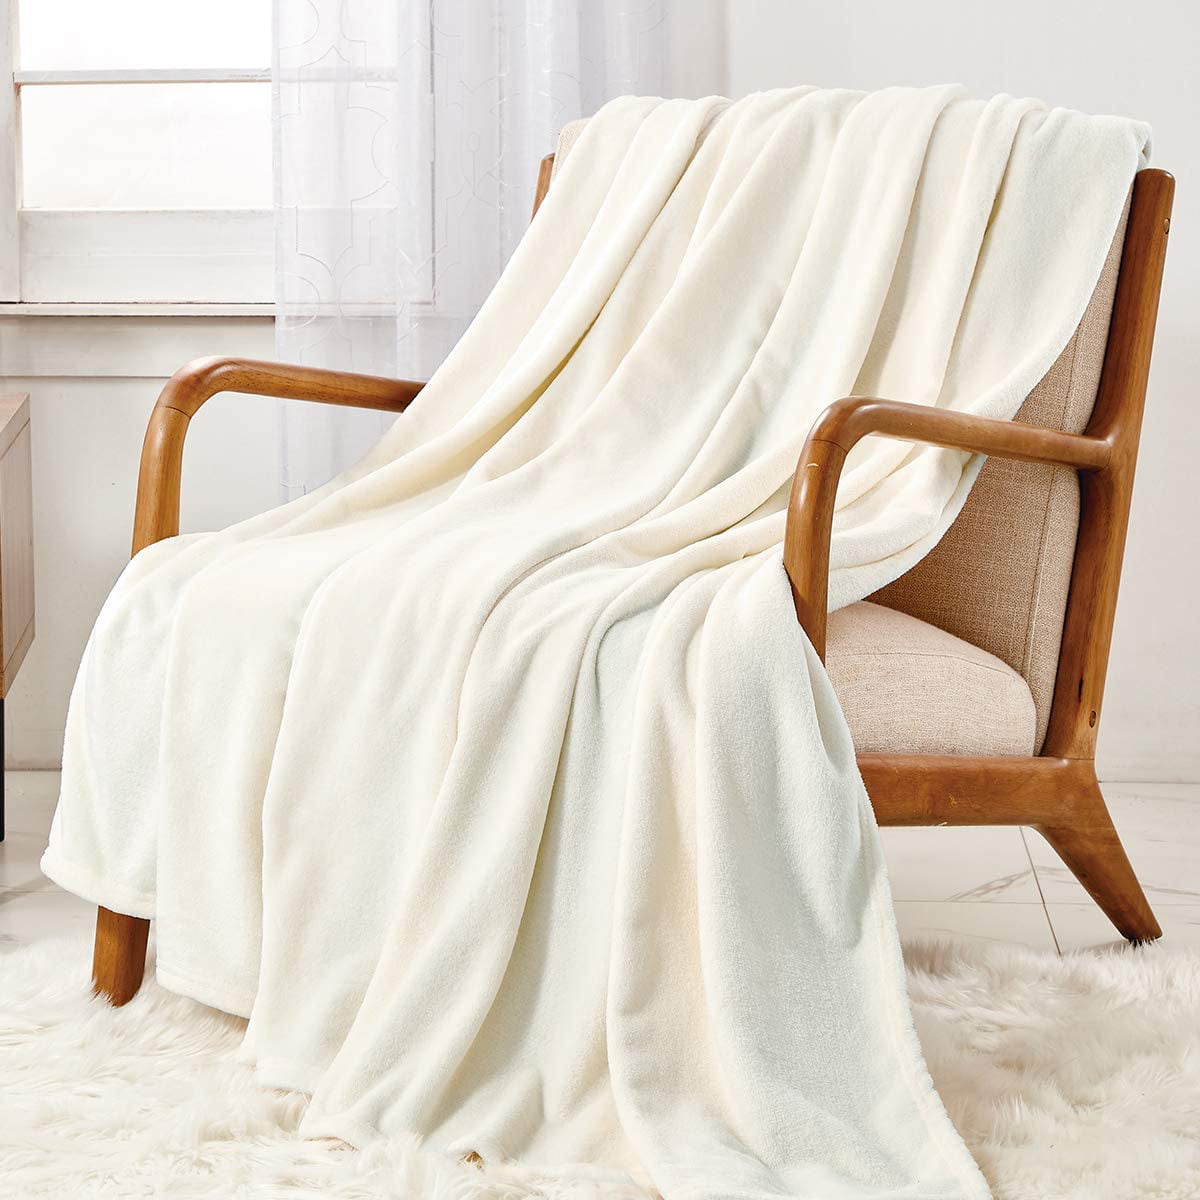 for Bed Sofa Chair Picnic Travel Pumpkins White Microfiber Flannel Blankets Lightweight Warm Camping Blanket All Season Indoor Air Conditioning Blanket 